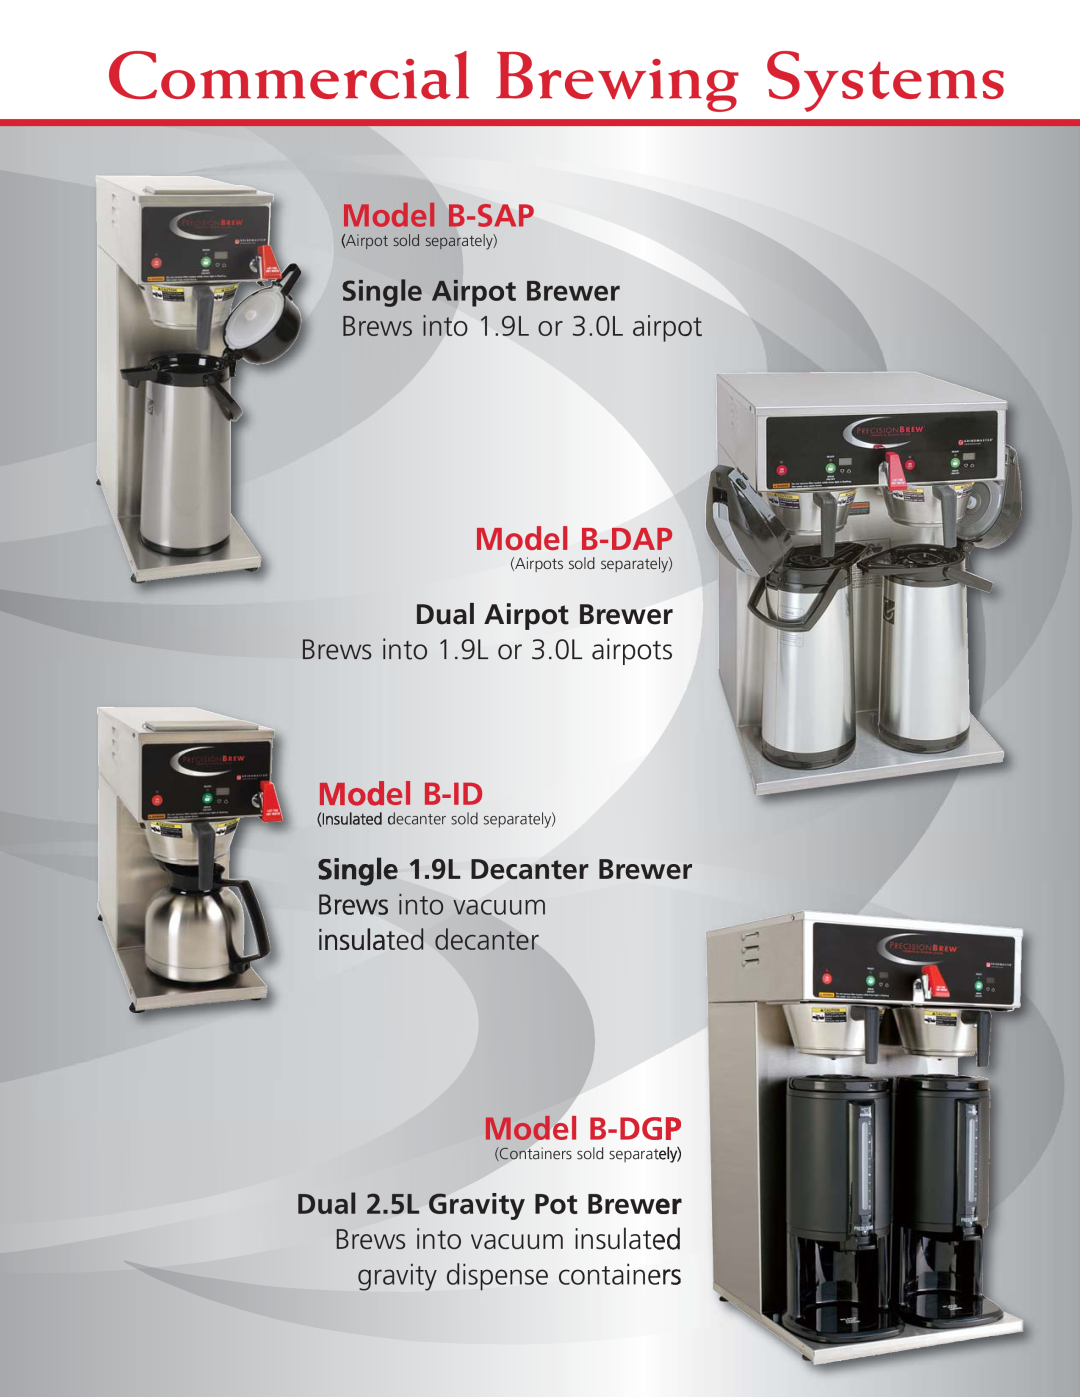 Grindmaster B-3WL, B-6 Commercial Brewing Systems, Model B-SAP, Model B-DAP, Model B-ID, Model B-DGP, Single Airpot Brewer 